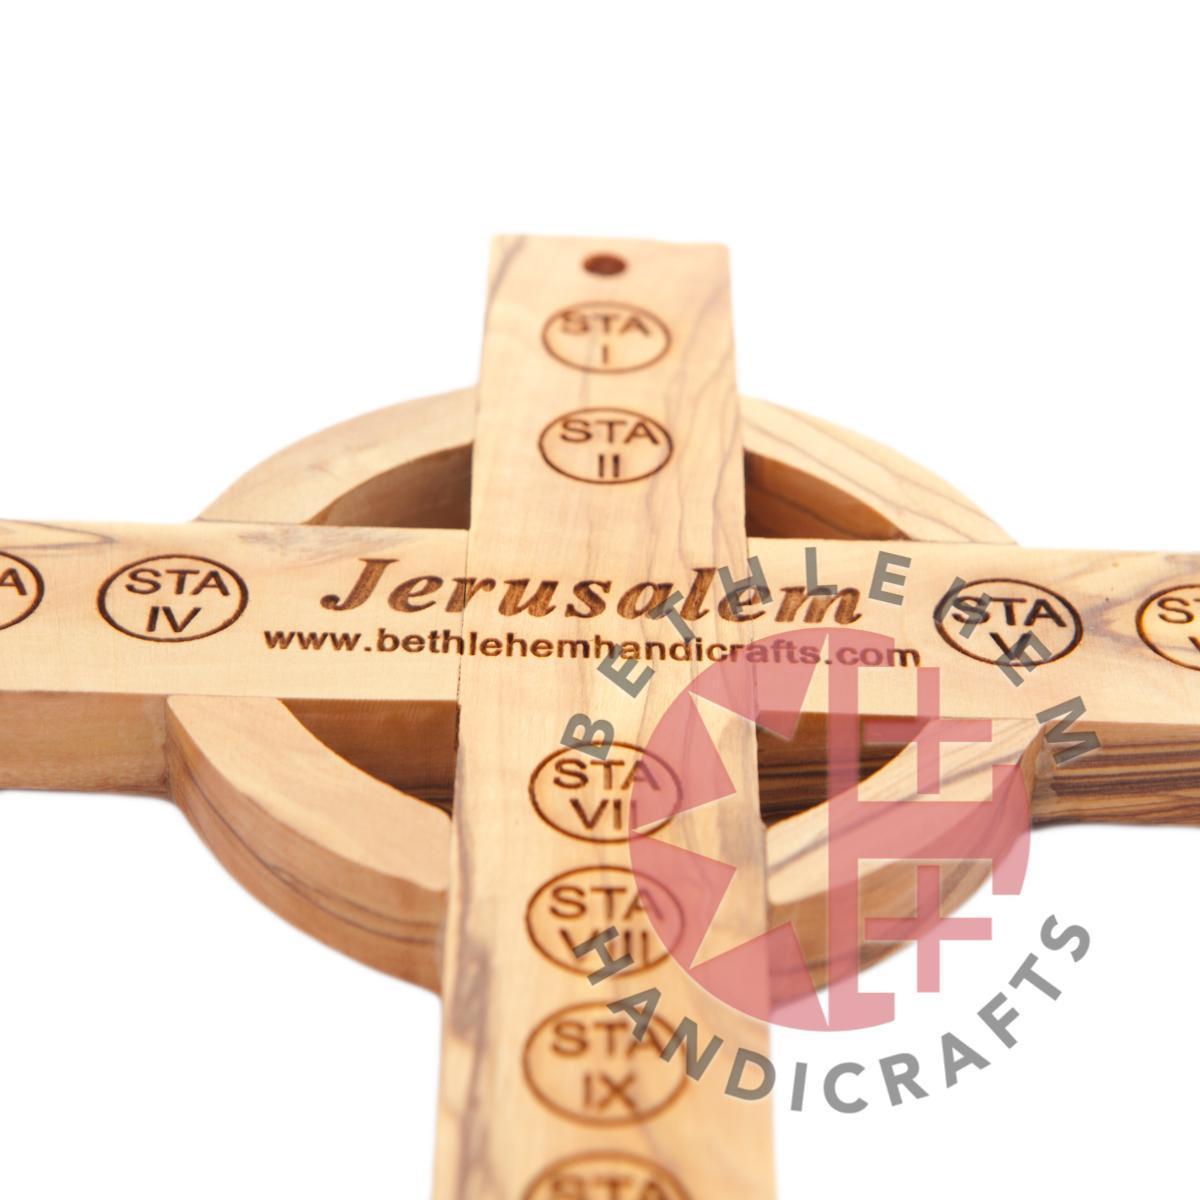 Celtic Olive Wood Cross with 14 Stations of the Cross Engraved Back Made Holy Land Christians Catholic Gift Home Jerusalem.jpg